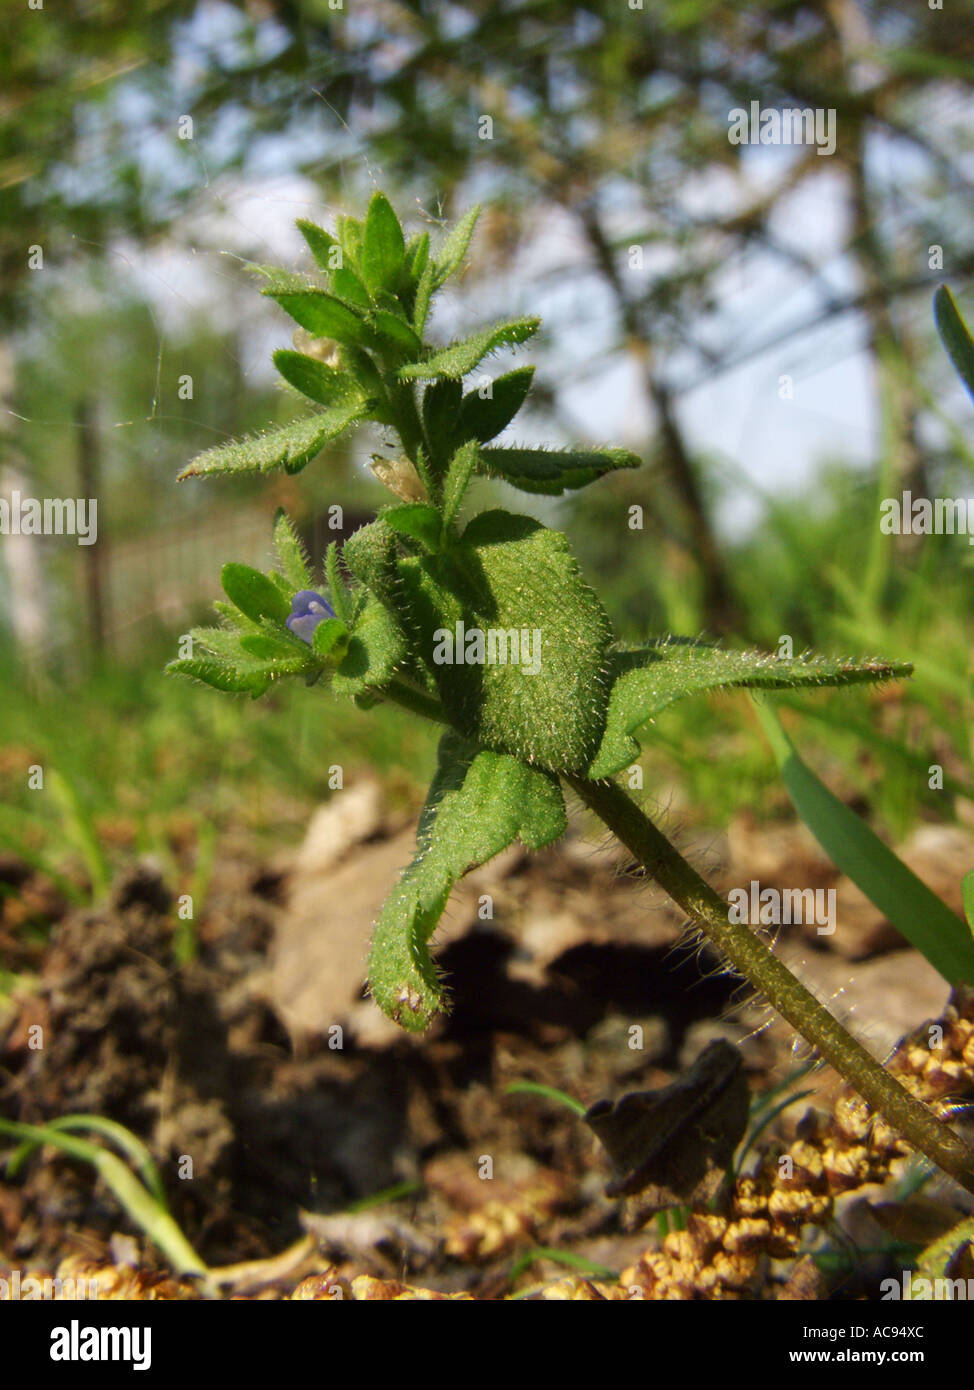 common speedwell, corn speedwell, wall speedwell (Veronica arvensis), flowering plant on industrial wasteland, Germany, North R Stock Photo